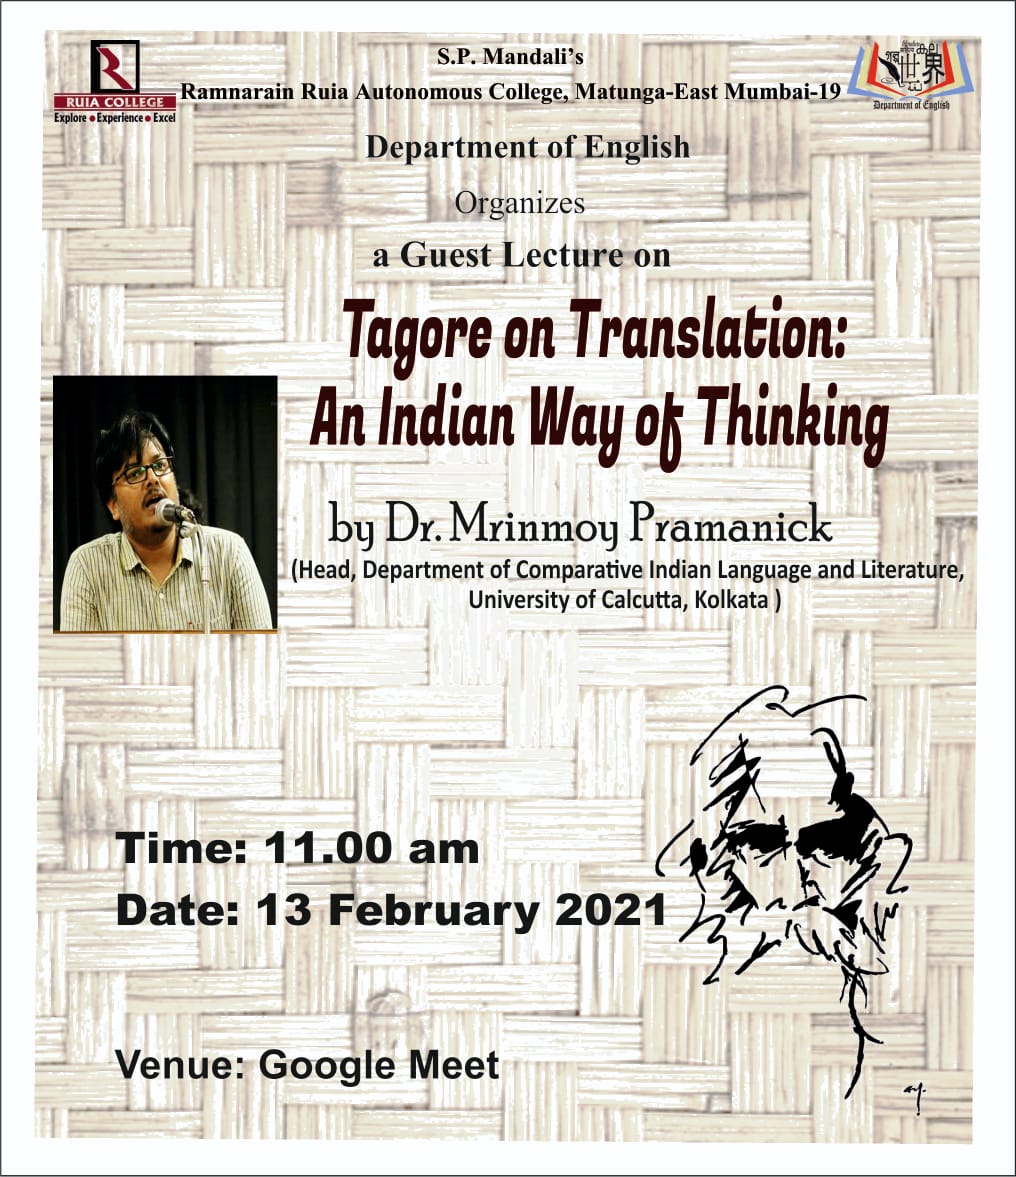 Tagore on Translation: An Indian Way of Thinking"* by Dr Mrinmoy Pramanick